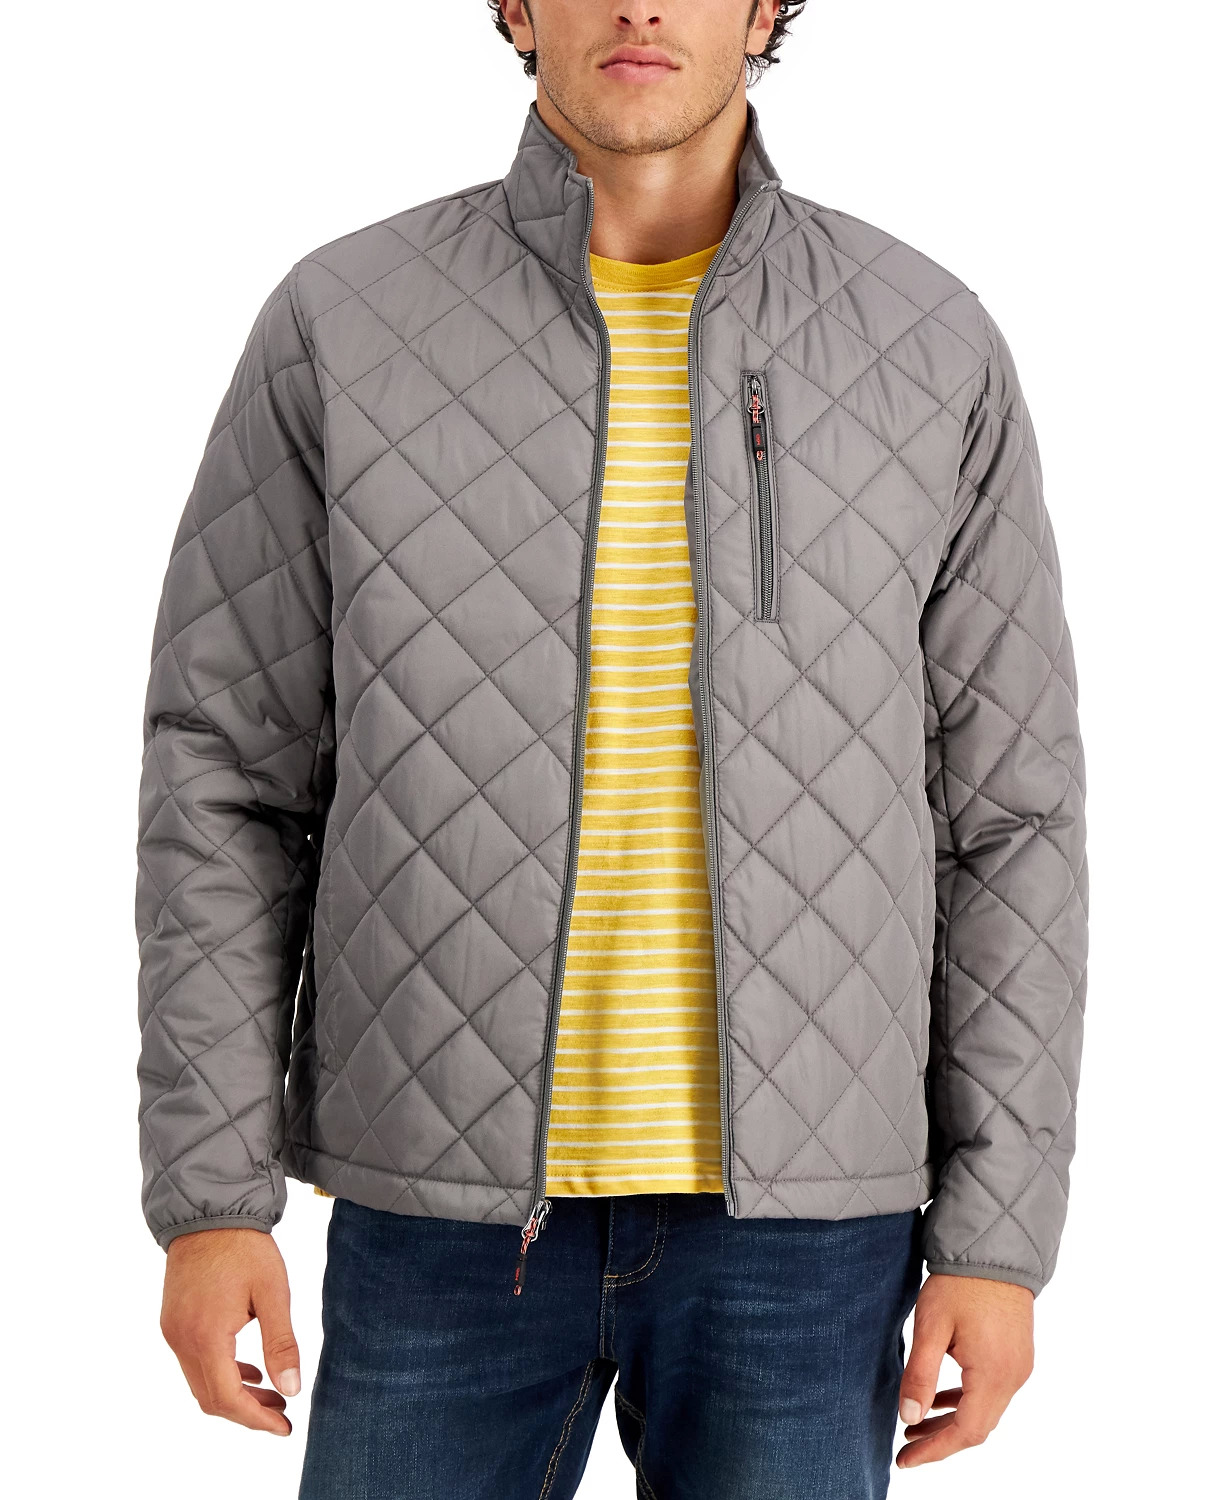 Hawke & Co. Men's Diamond Quilted Jacket (Smoked Pearl, Size Small) $25 + SD Cashback + Free Shipping